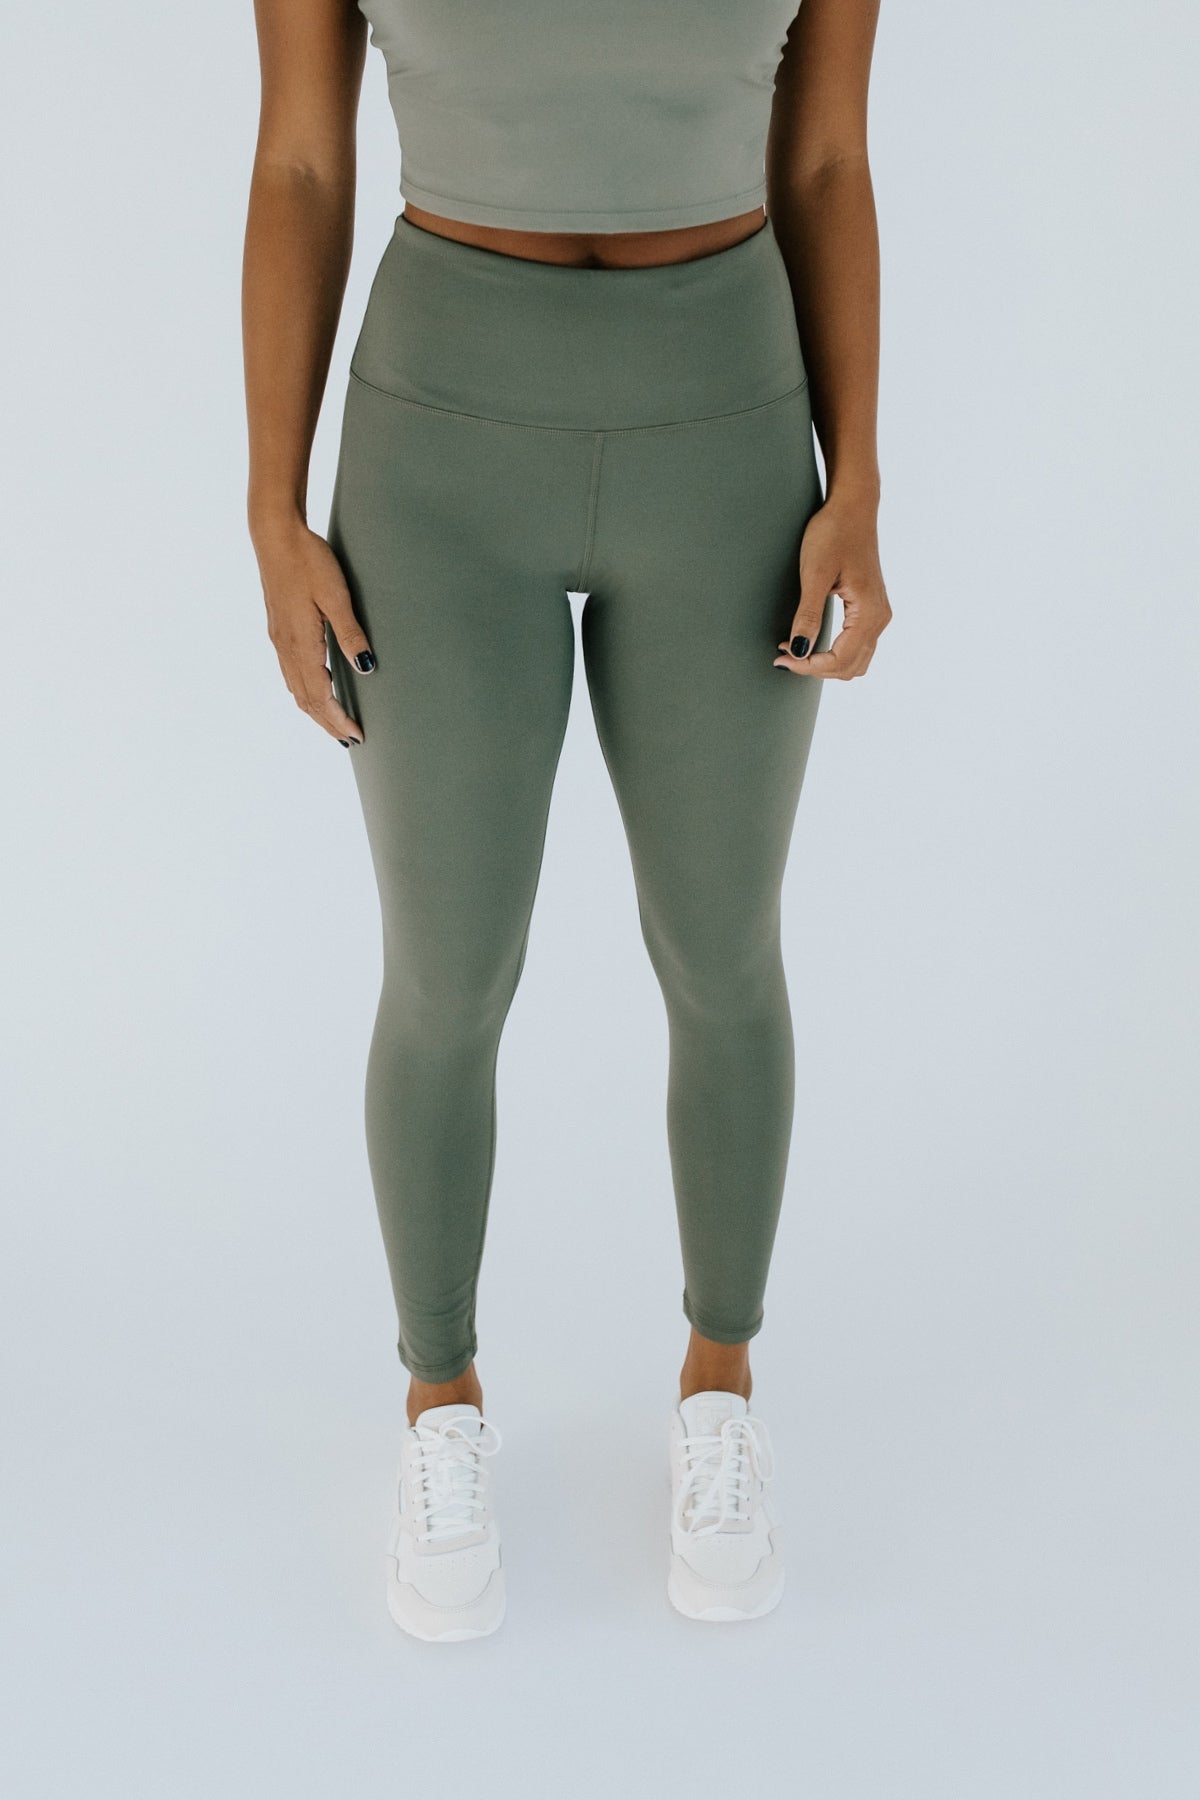 Keep Pace Legging - Olive